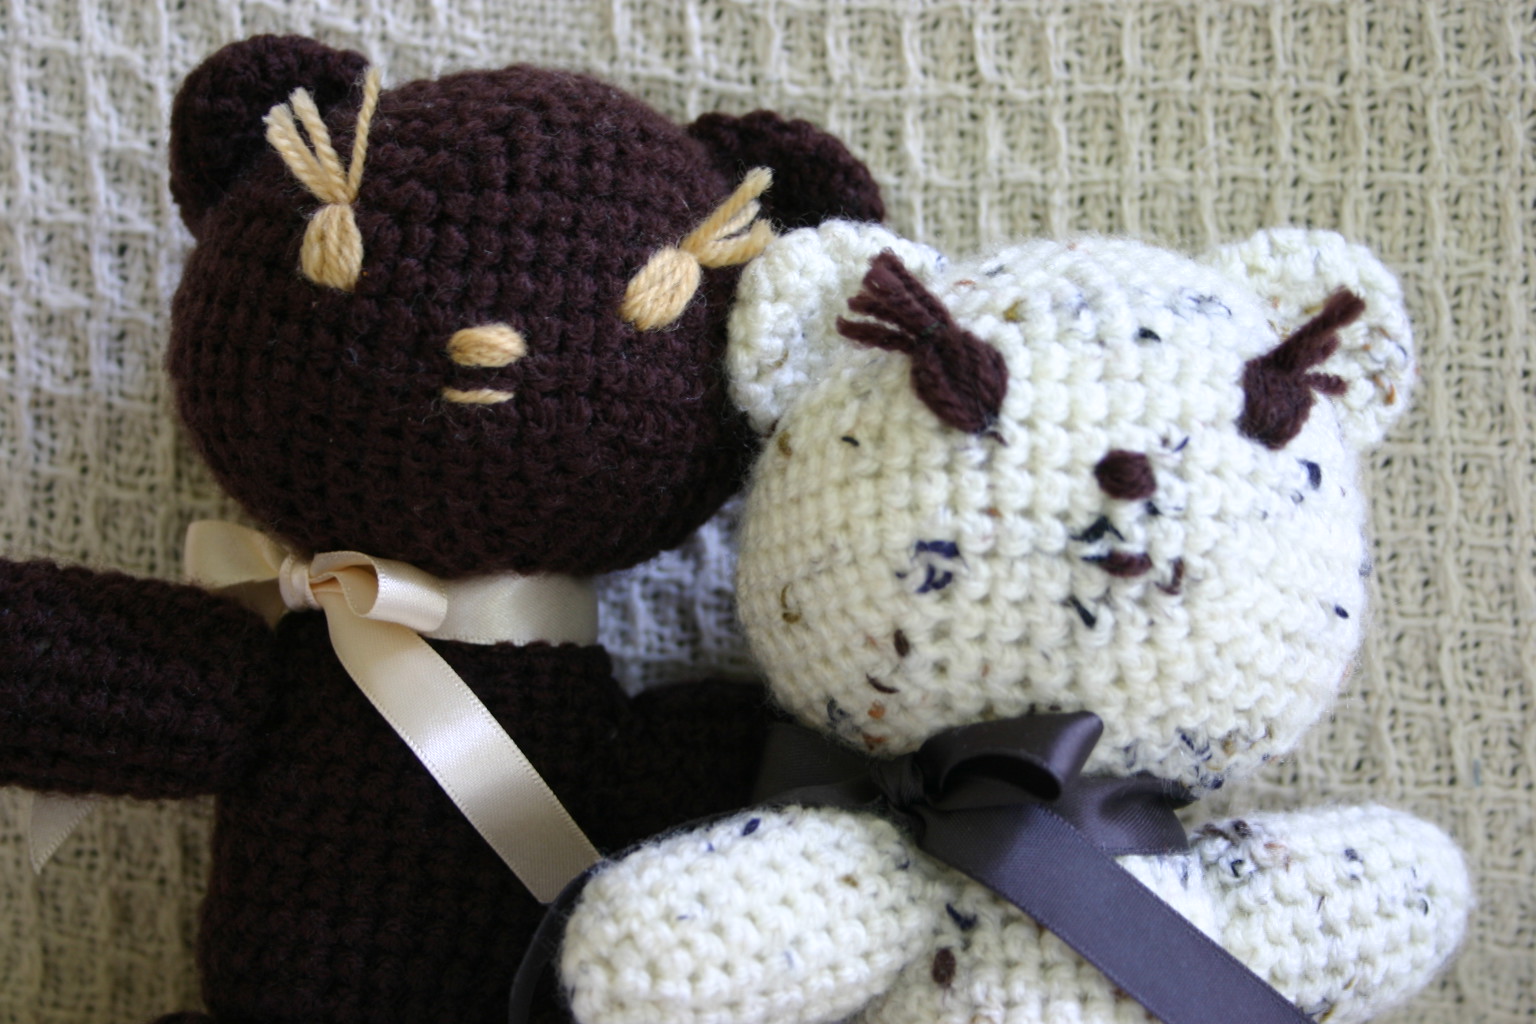 two knitted teddy bears in the shape of bears